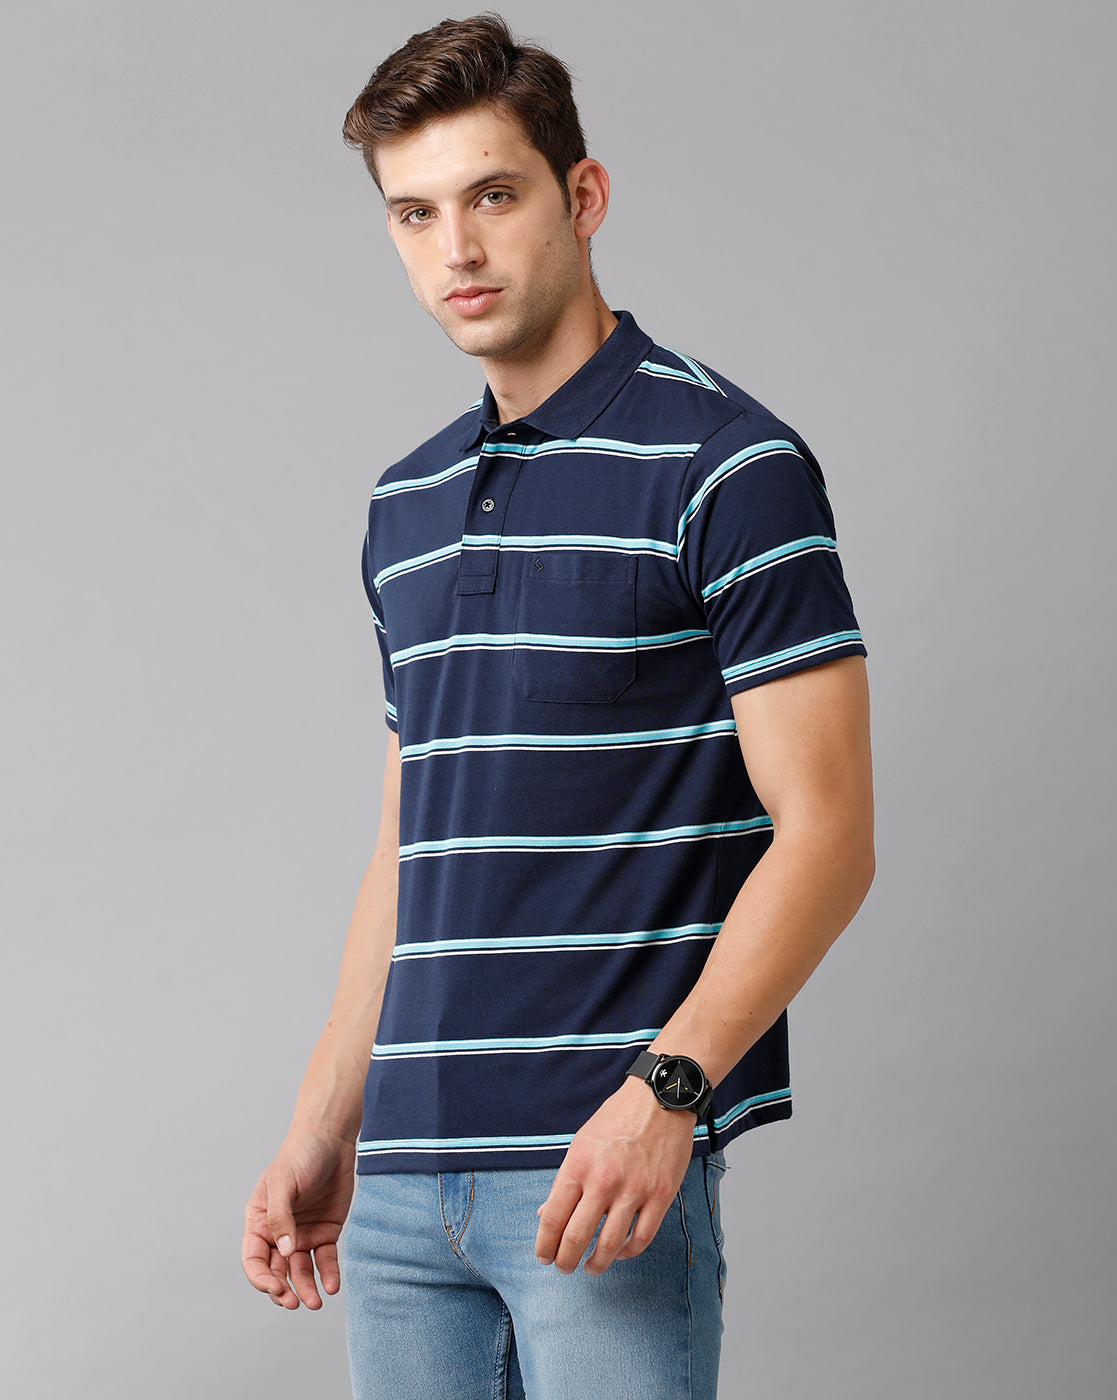 Classic Polo Mens Cotton Blend Striped Half Sleeve Authentic Fit Polo Neck Navy Blue Color T-Shirt | Avon 502 A